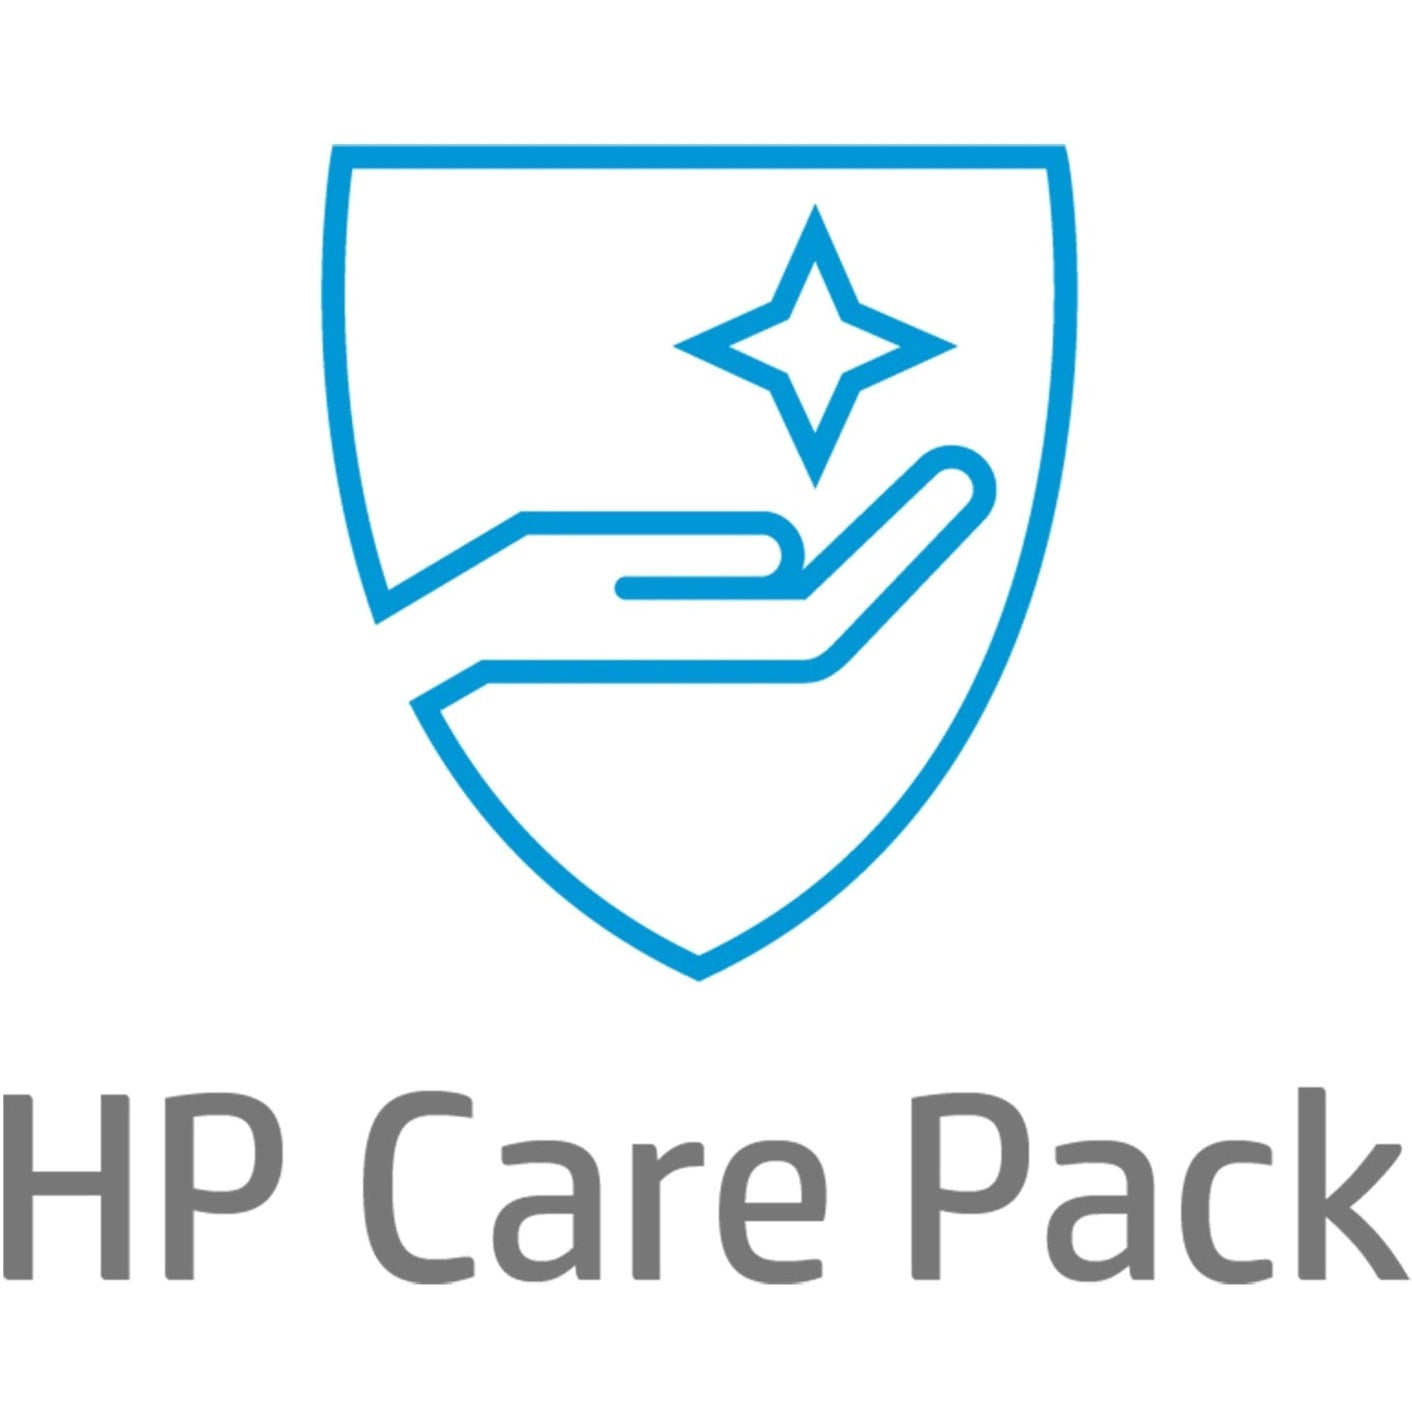 HP Care Pack Hardware Support with Accidental Damage Protection - 1 Year - Service (UL845E)